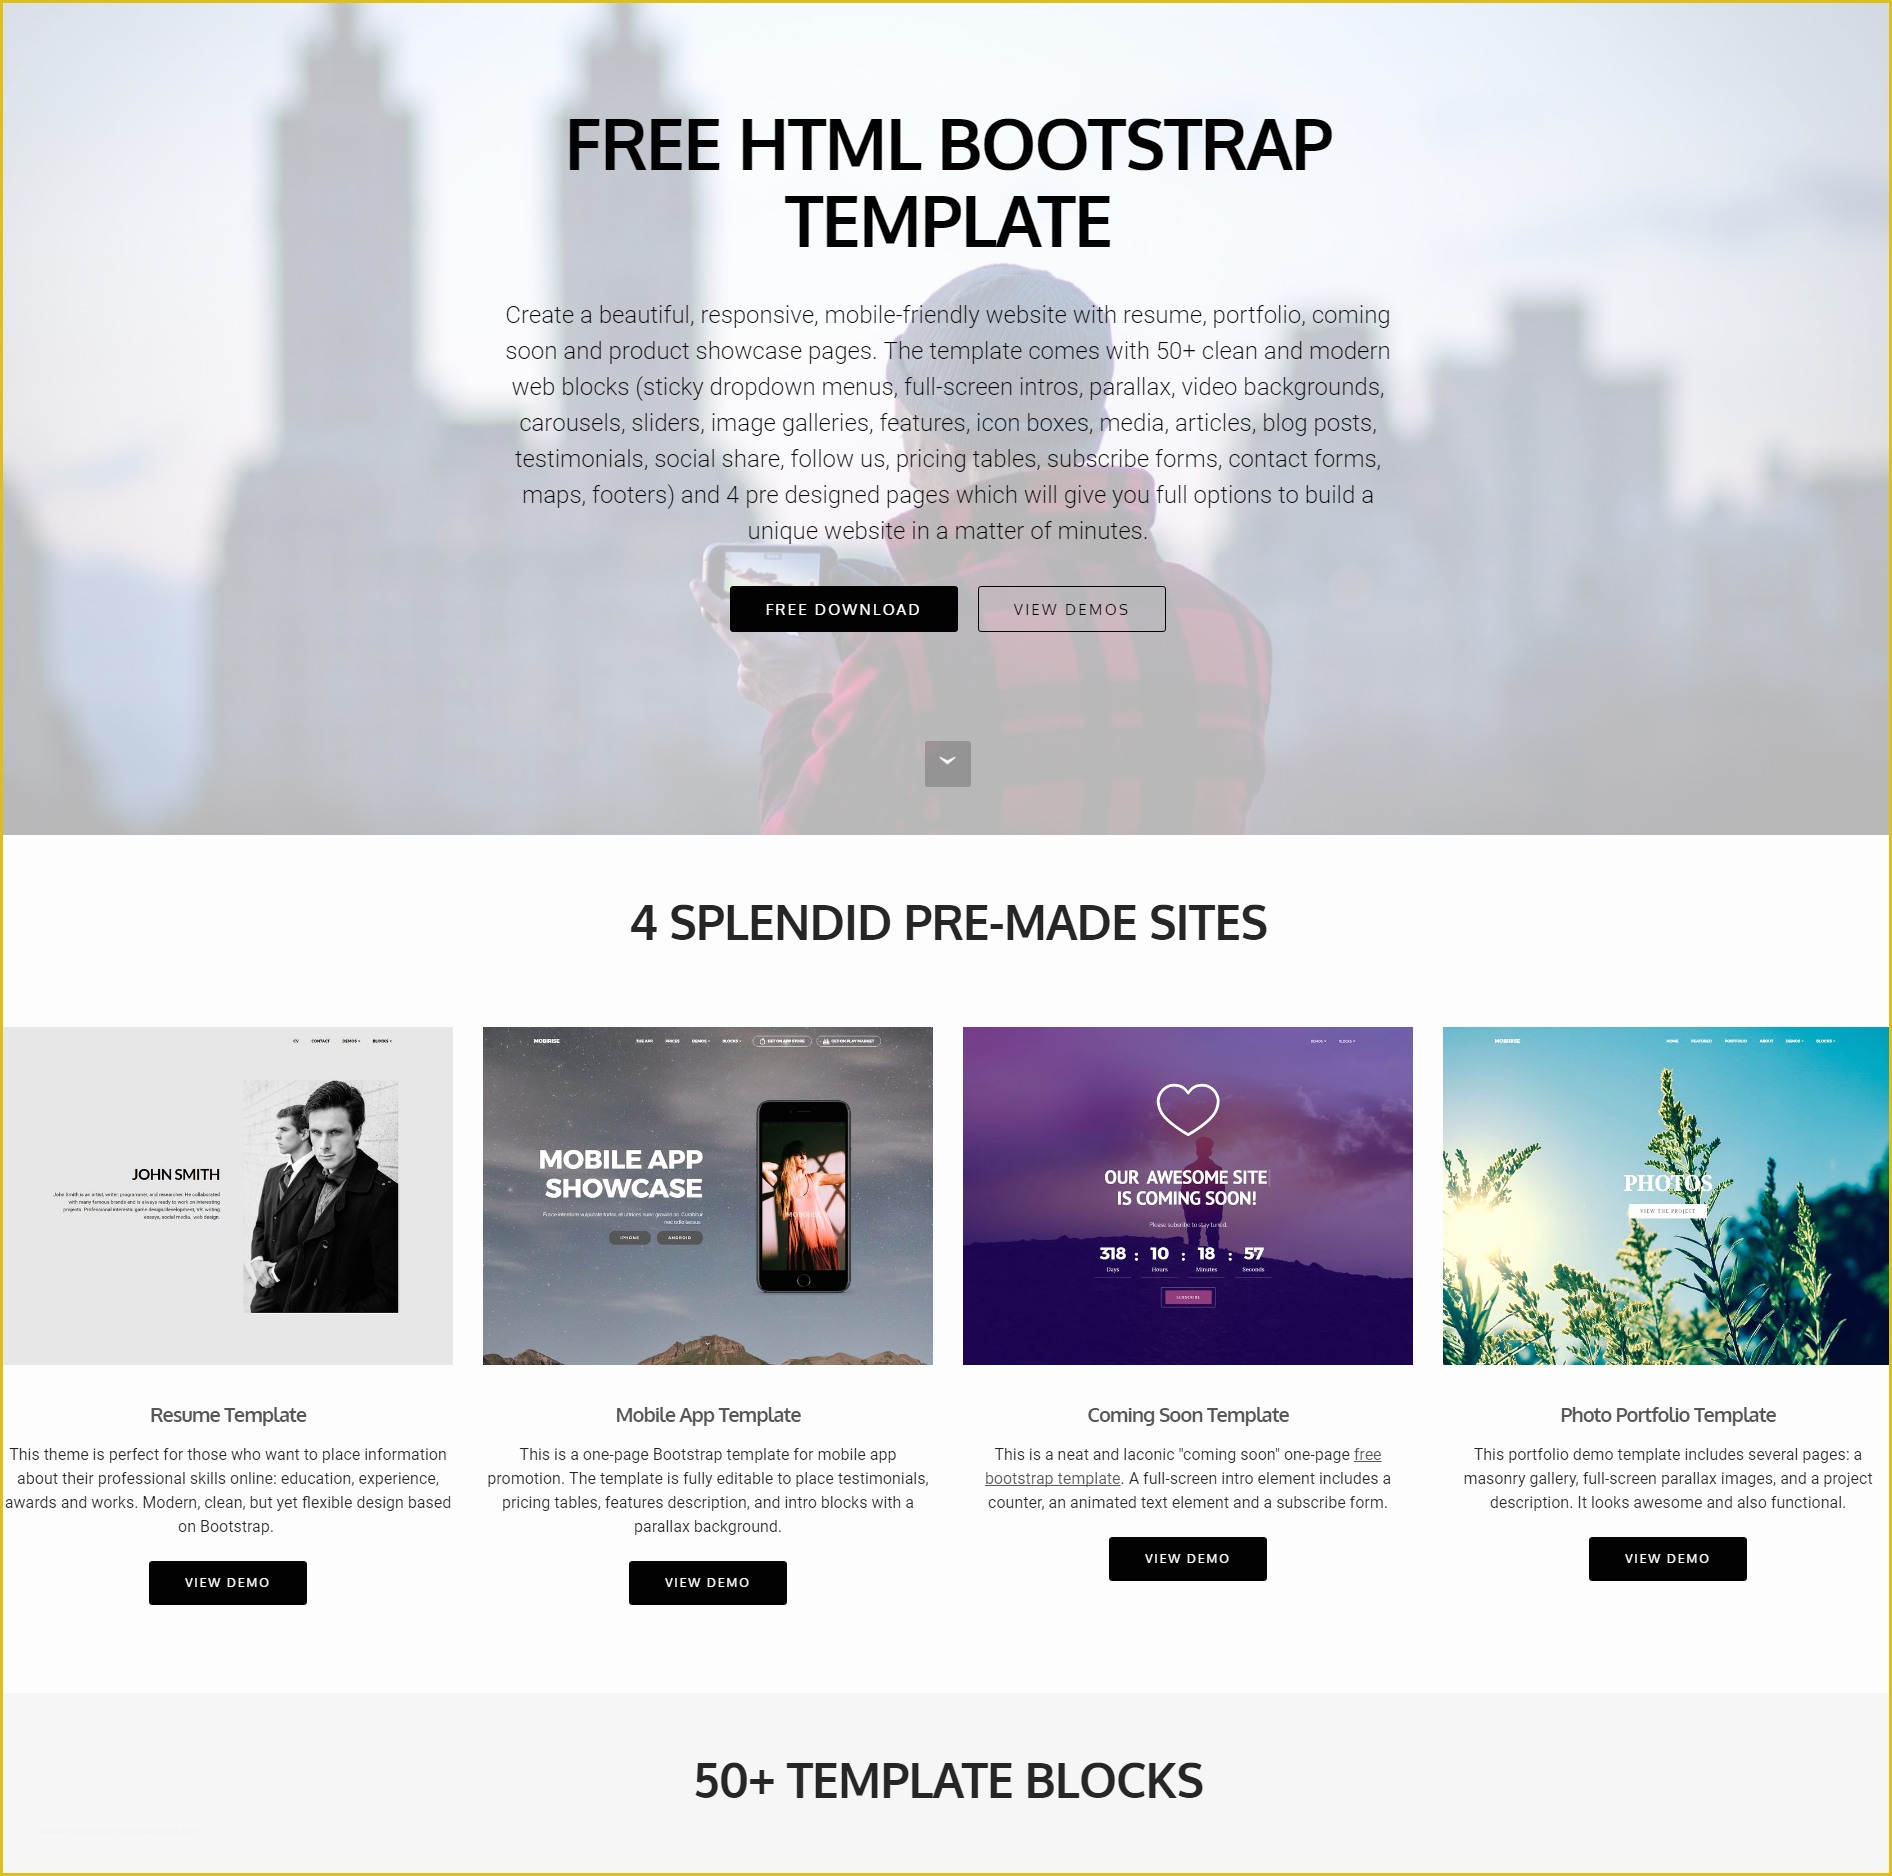 Free Site Templates Of 39 Brand New Free HTML Bootstrap Templates 2019